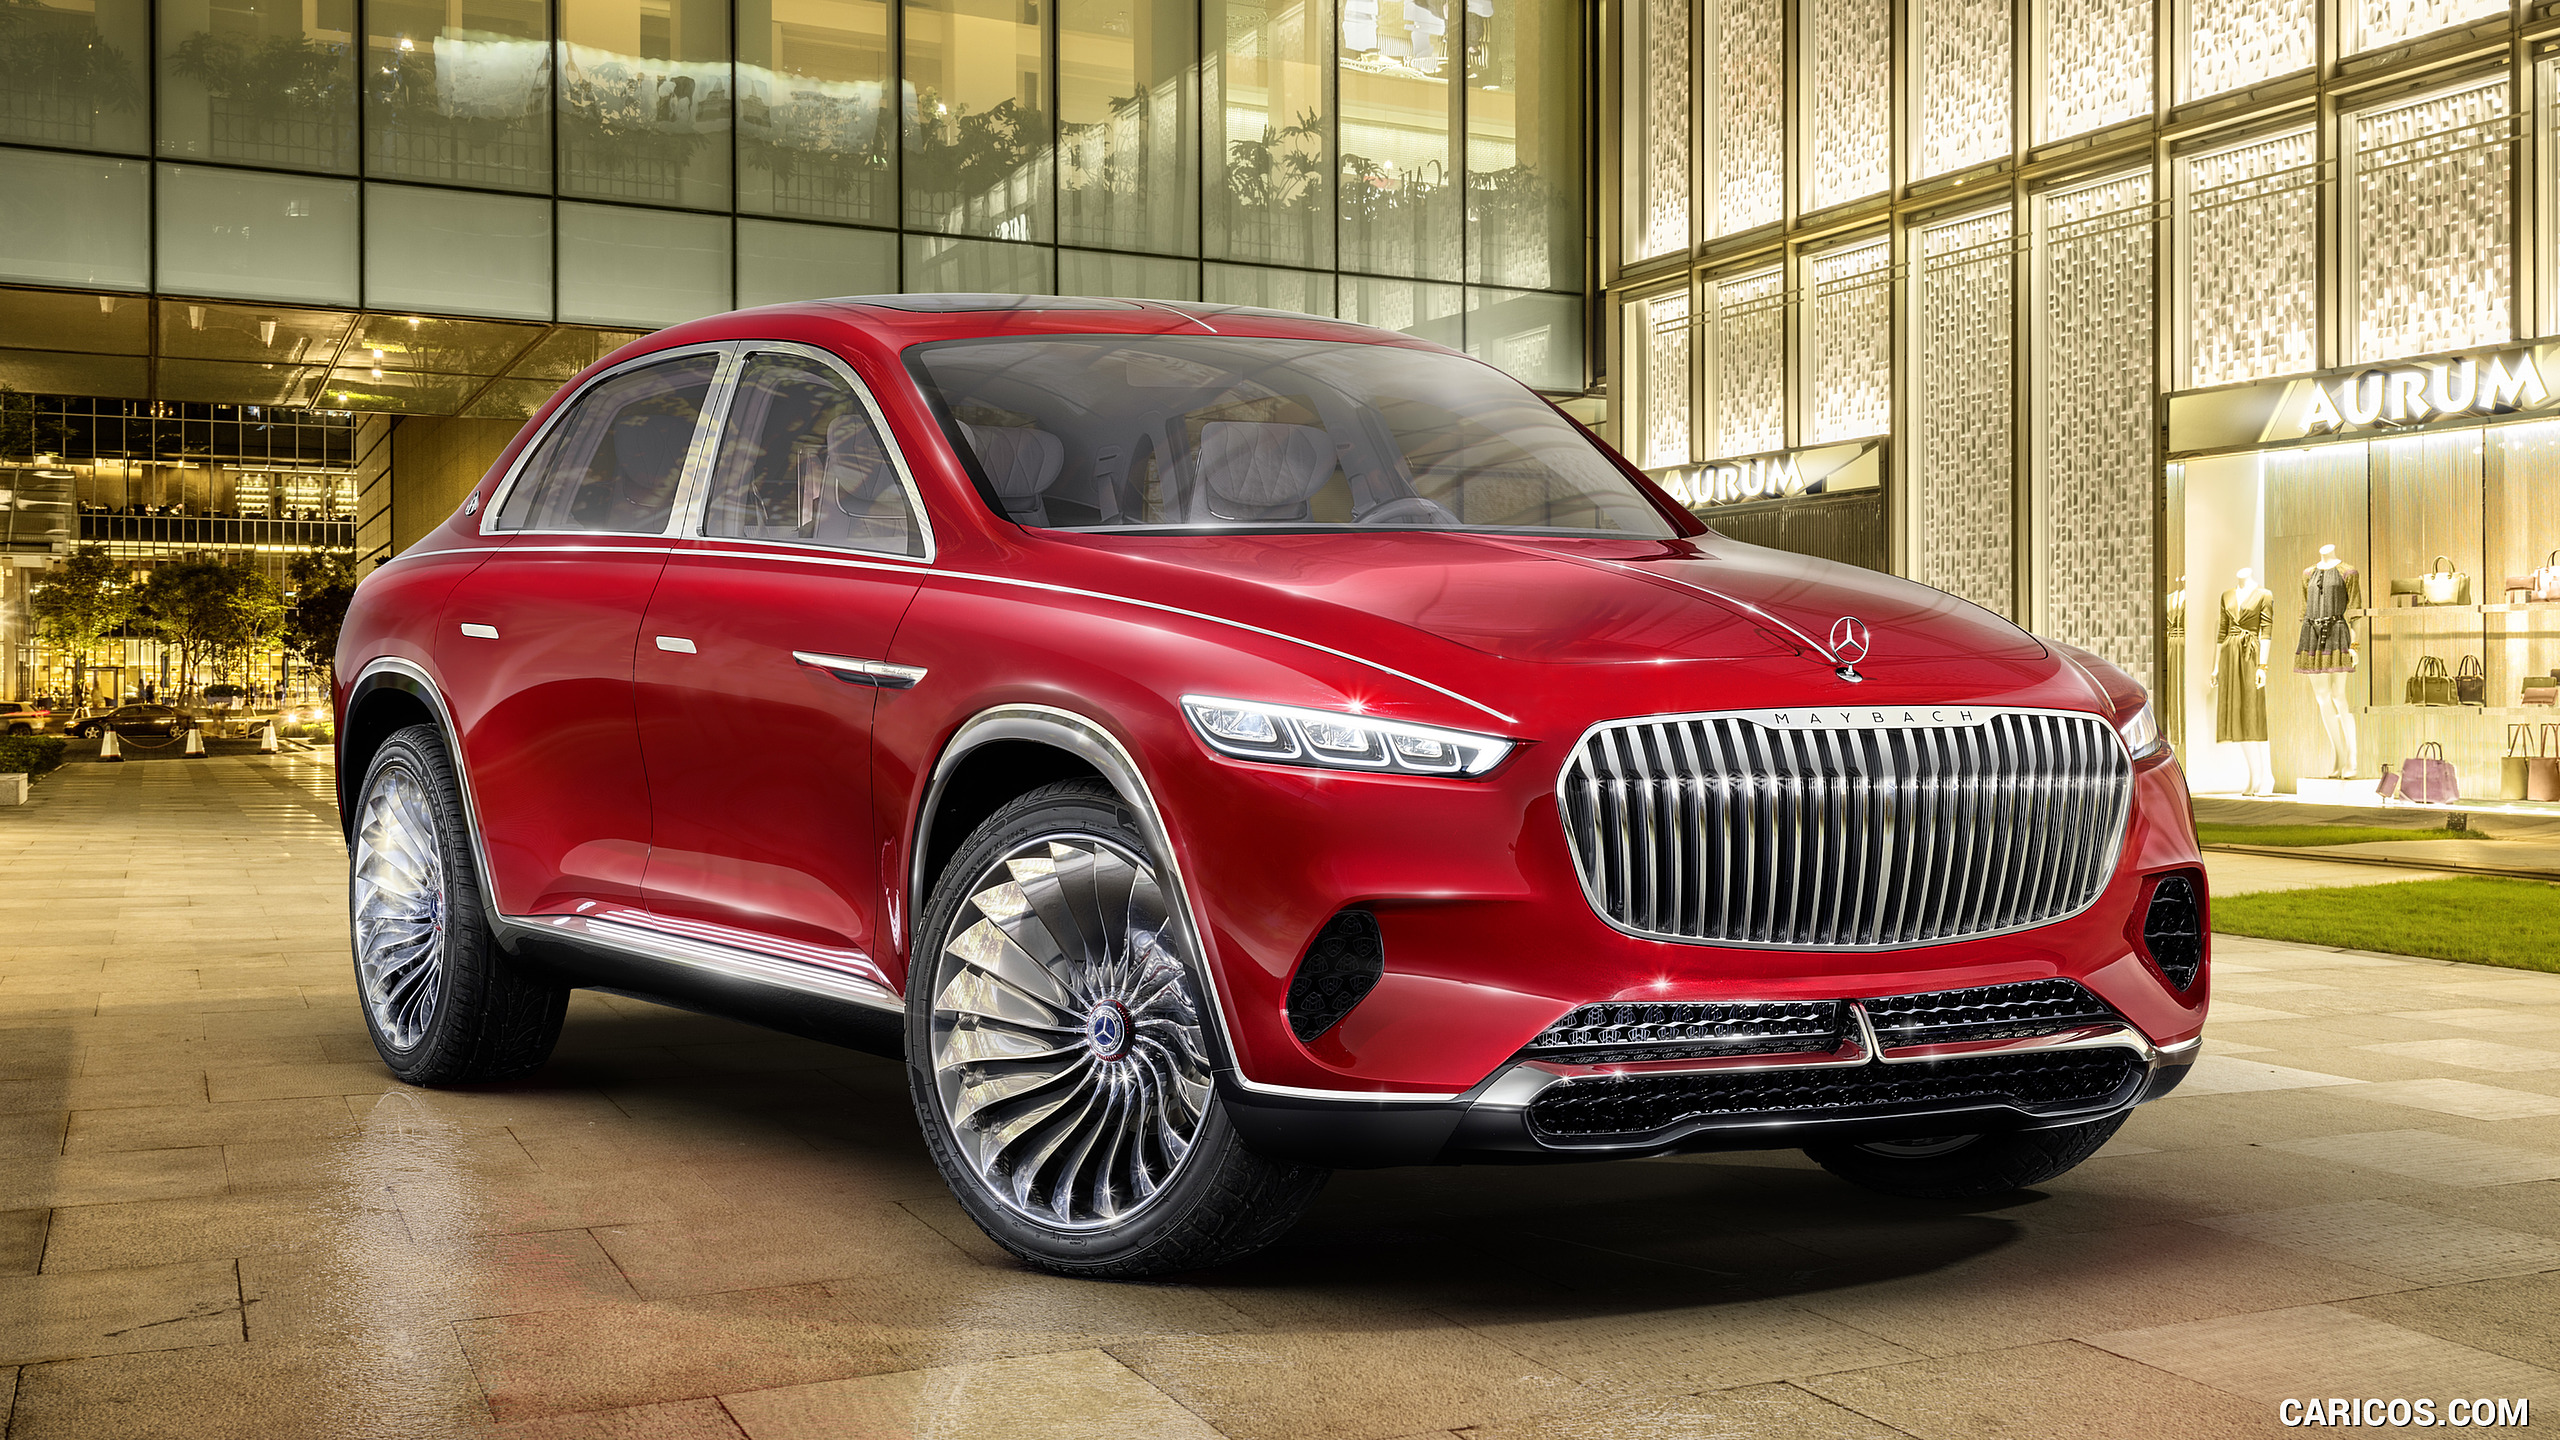 2018 Mercedes-Maybach Vision Ultimate Luxury SUV Concept - Front Three-Quarter, #4 of 41